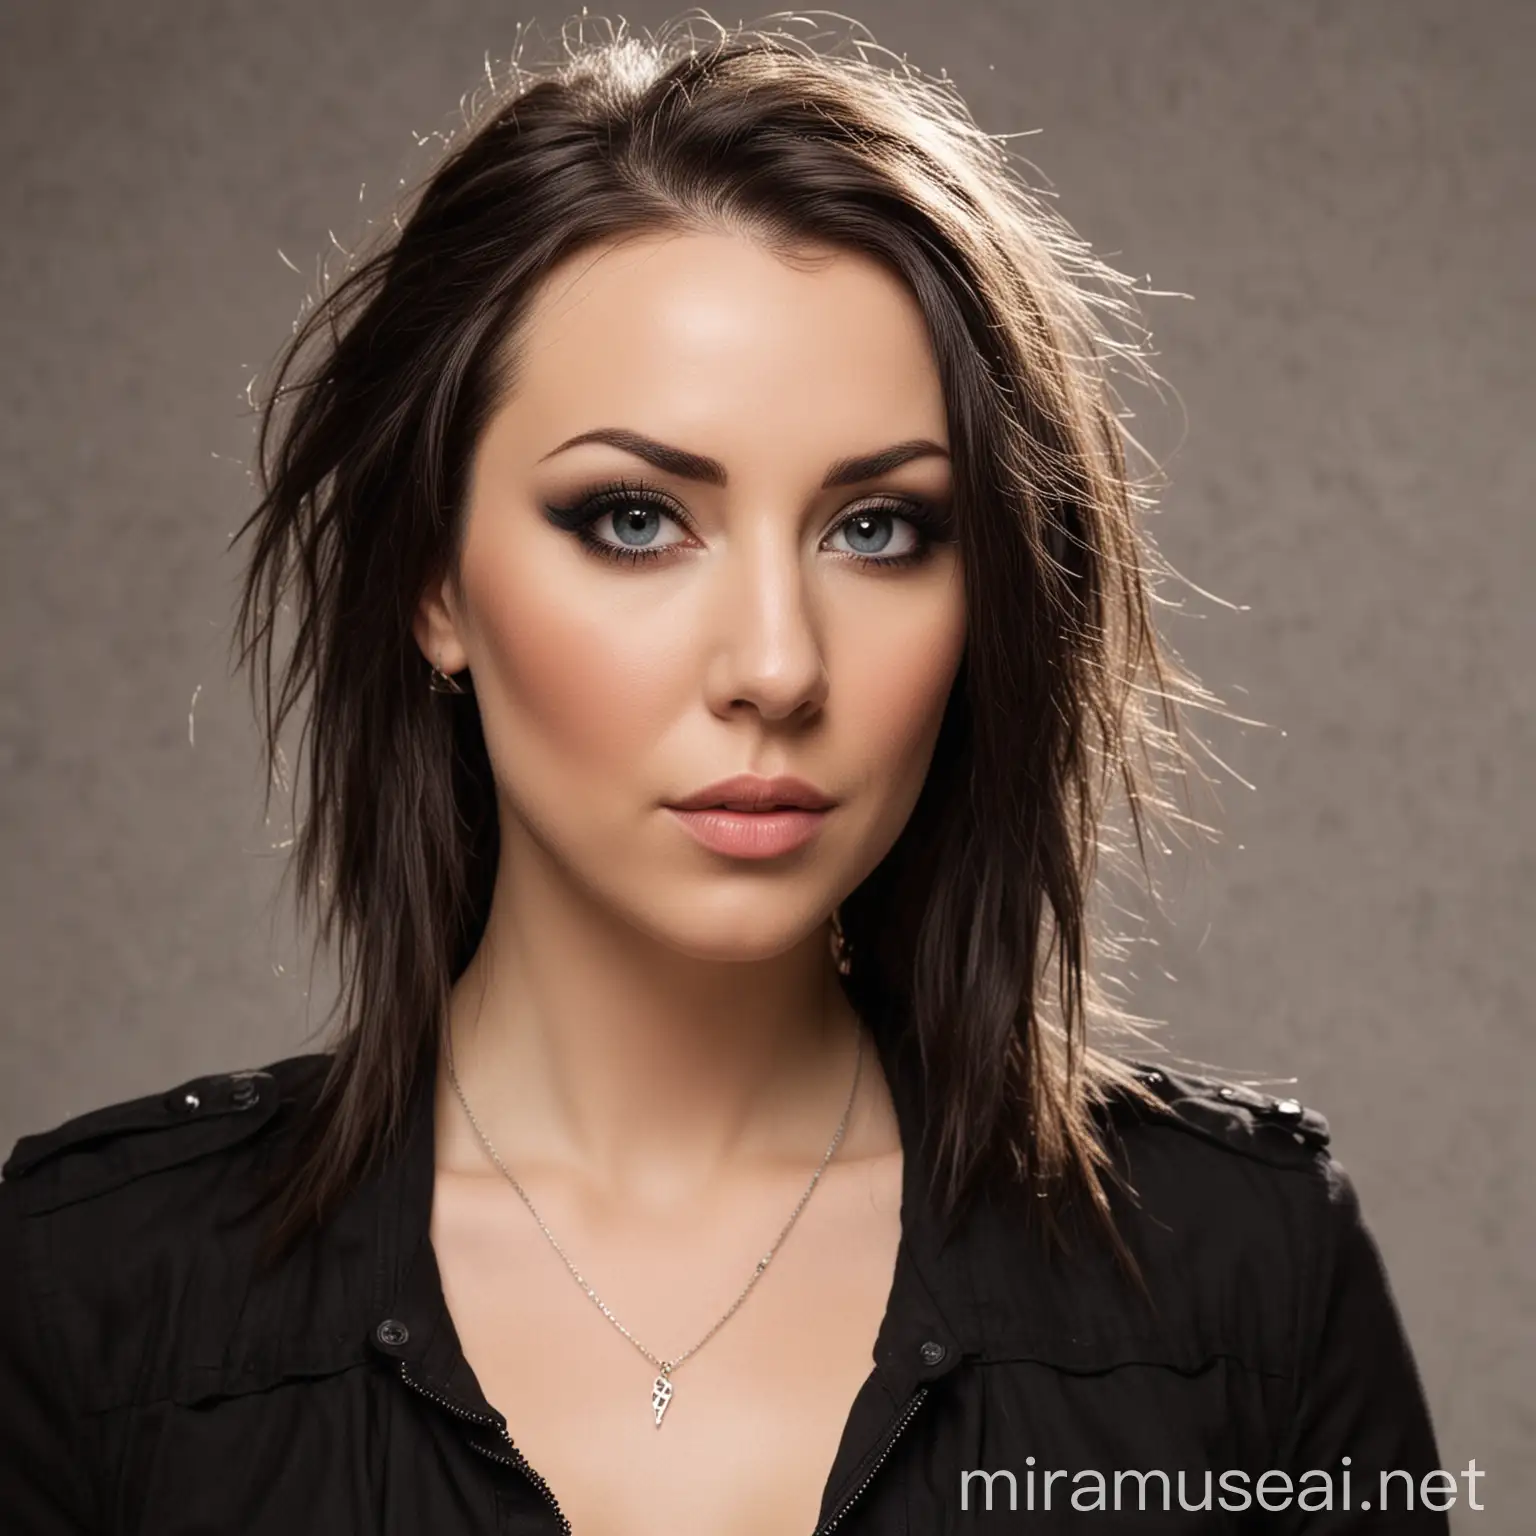 Elize Ryd from Amaranthe with Short Hair Portrait